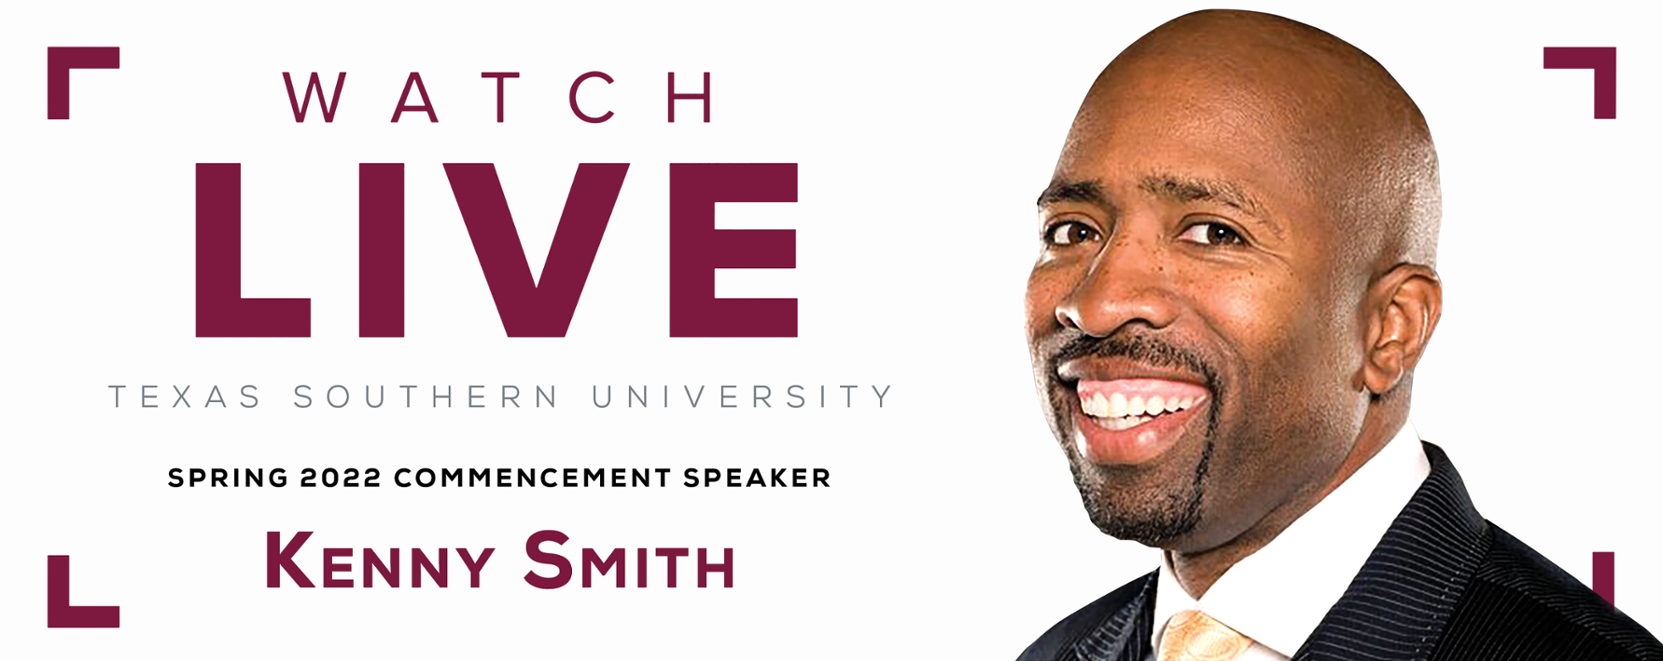 tsu_spring_2022_commencement_kenny_smith_watch_live_slider